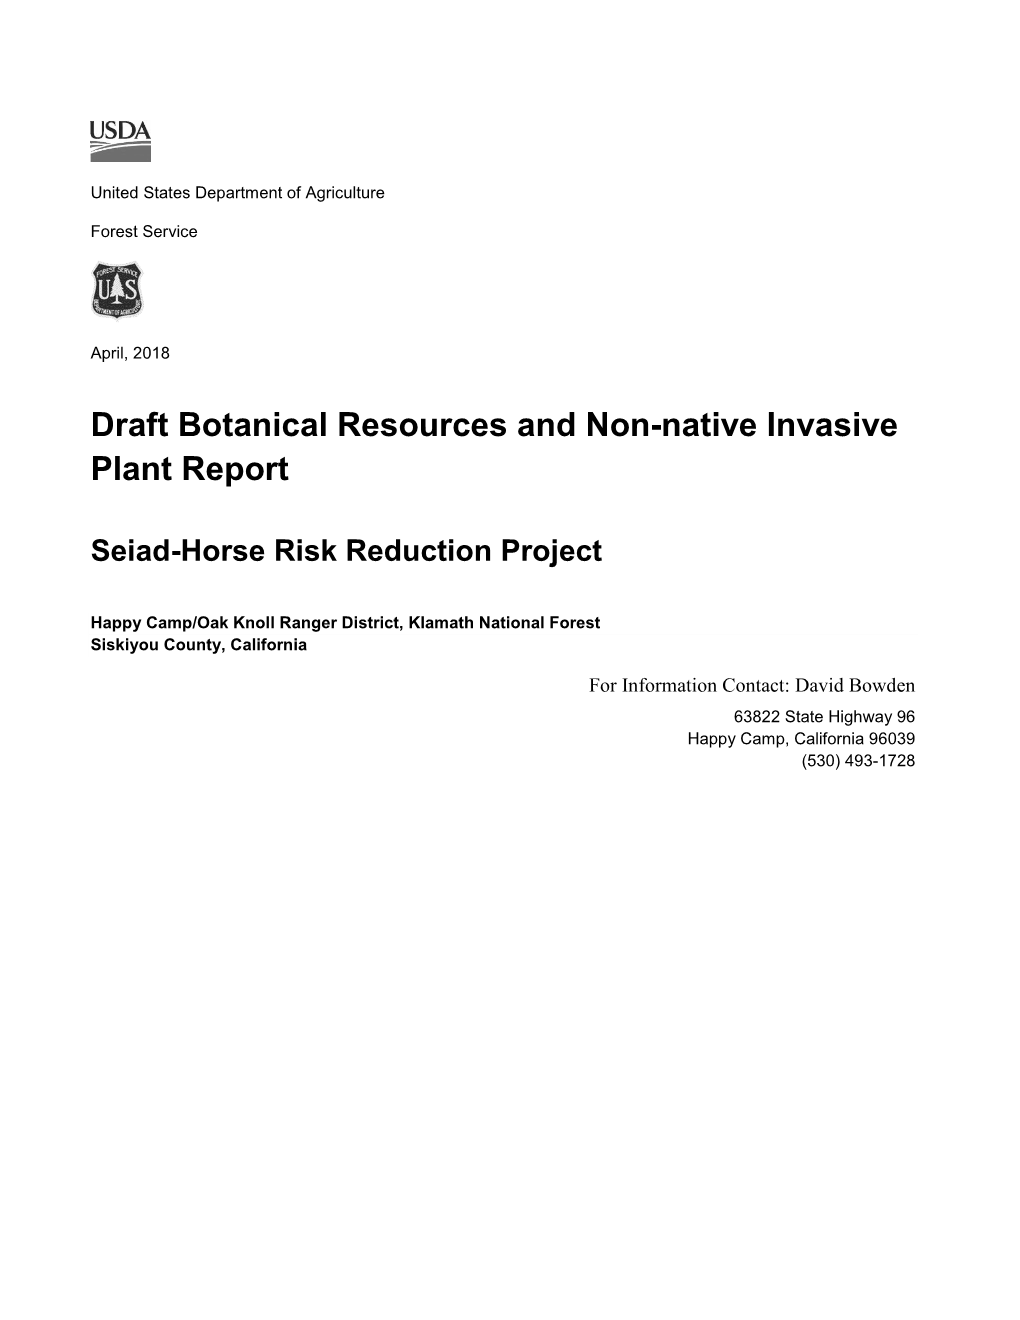 Seiad-Horse Project Botany and Invasive Plant Resource Report